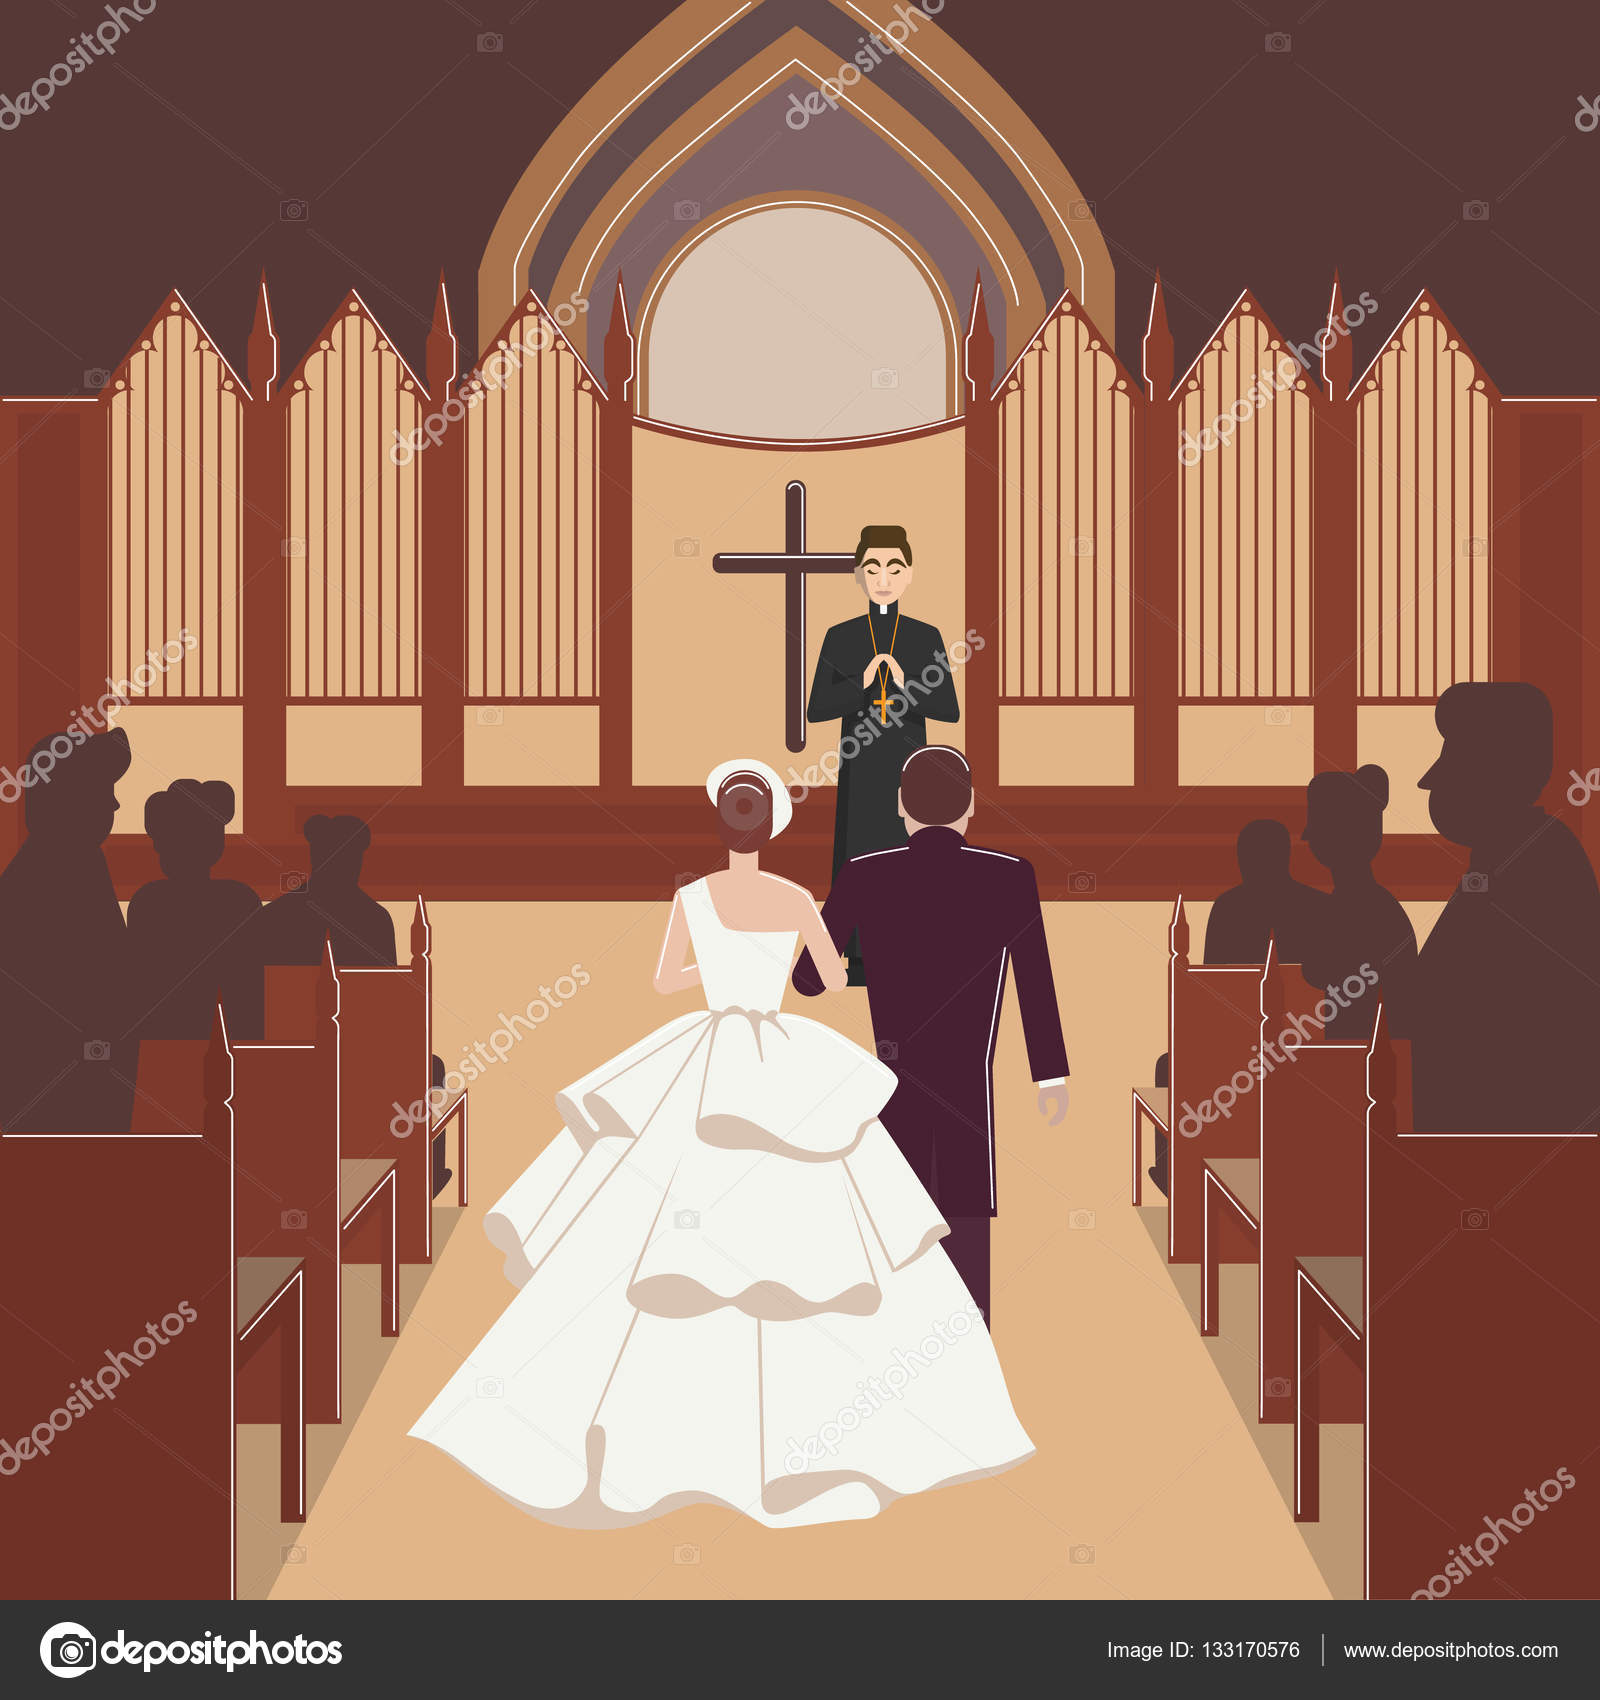 Featured image of post Wedding Chapel Clipart : 49,609 likes · 3,014 talking about this · 48,769 were here.